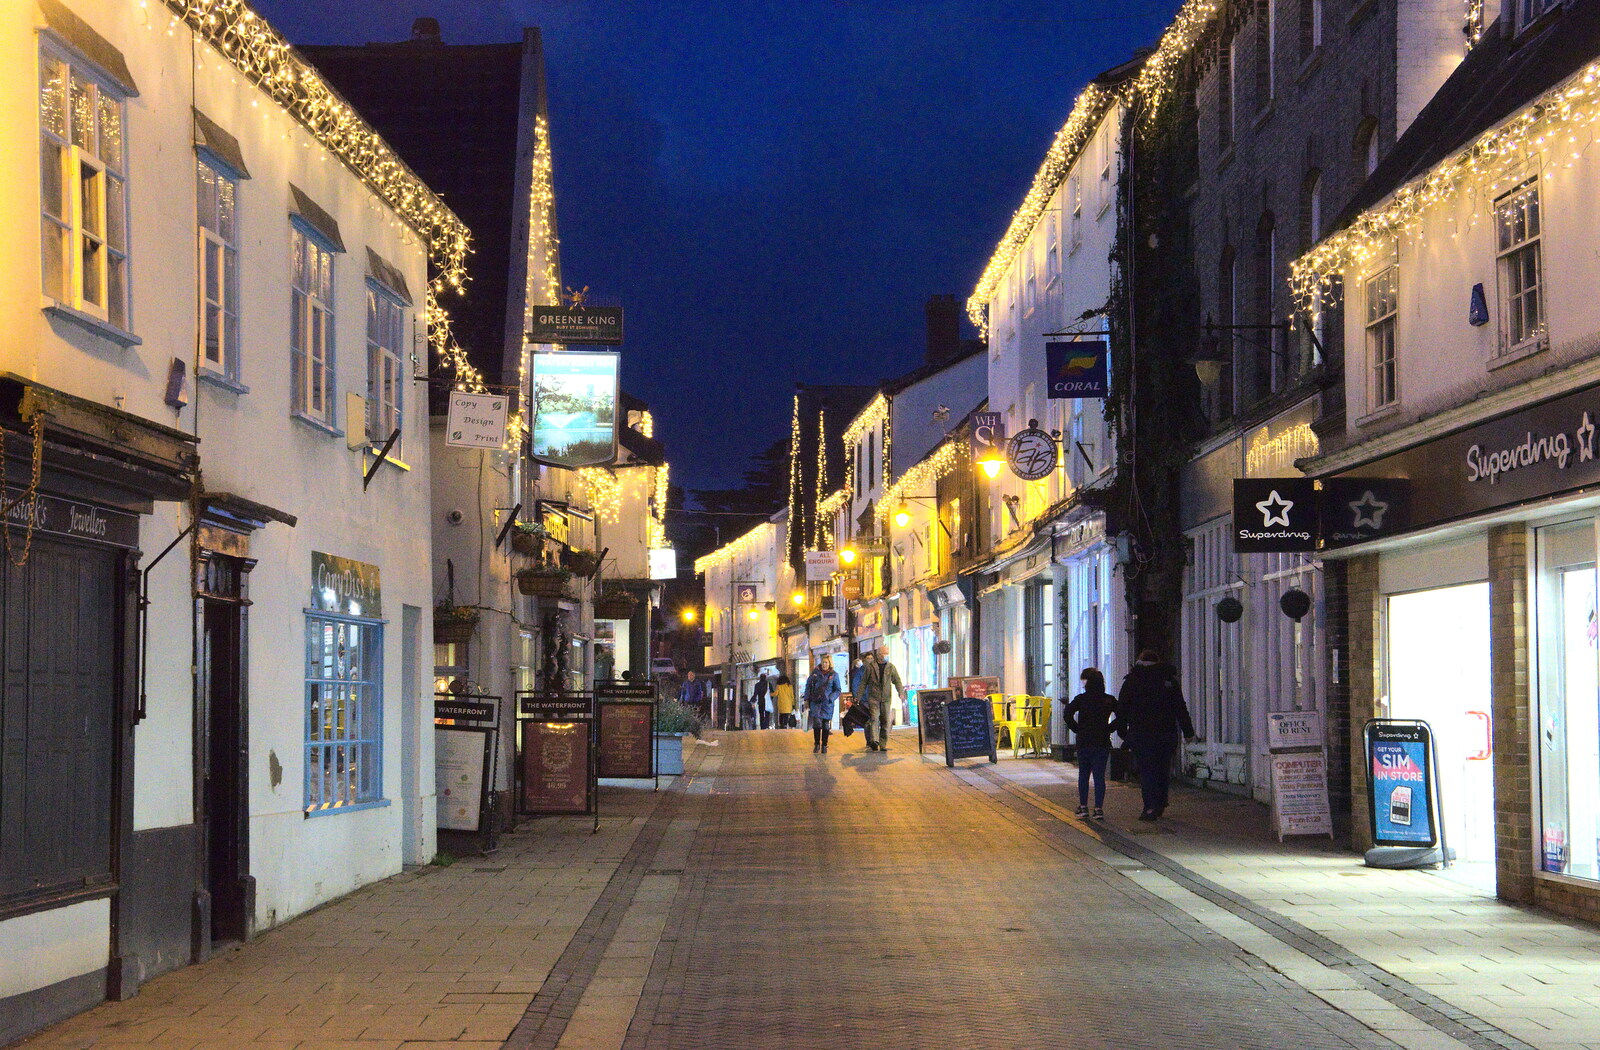 Mere Street in Diss has its Christmas lights on from A Return to the Oaksmere, Brome, Suffolk - 8th December 2020